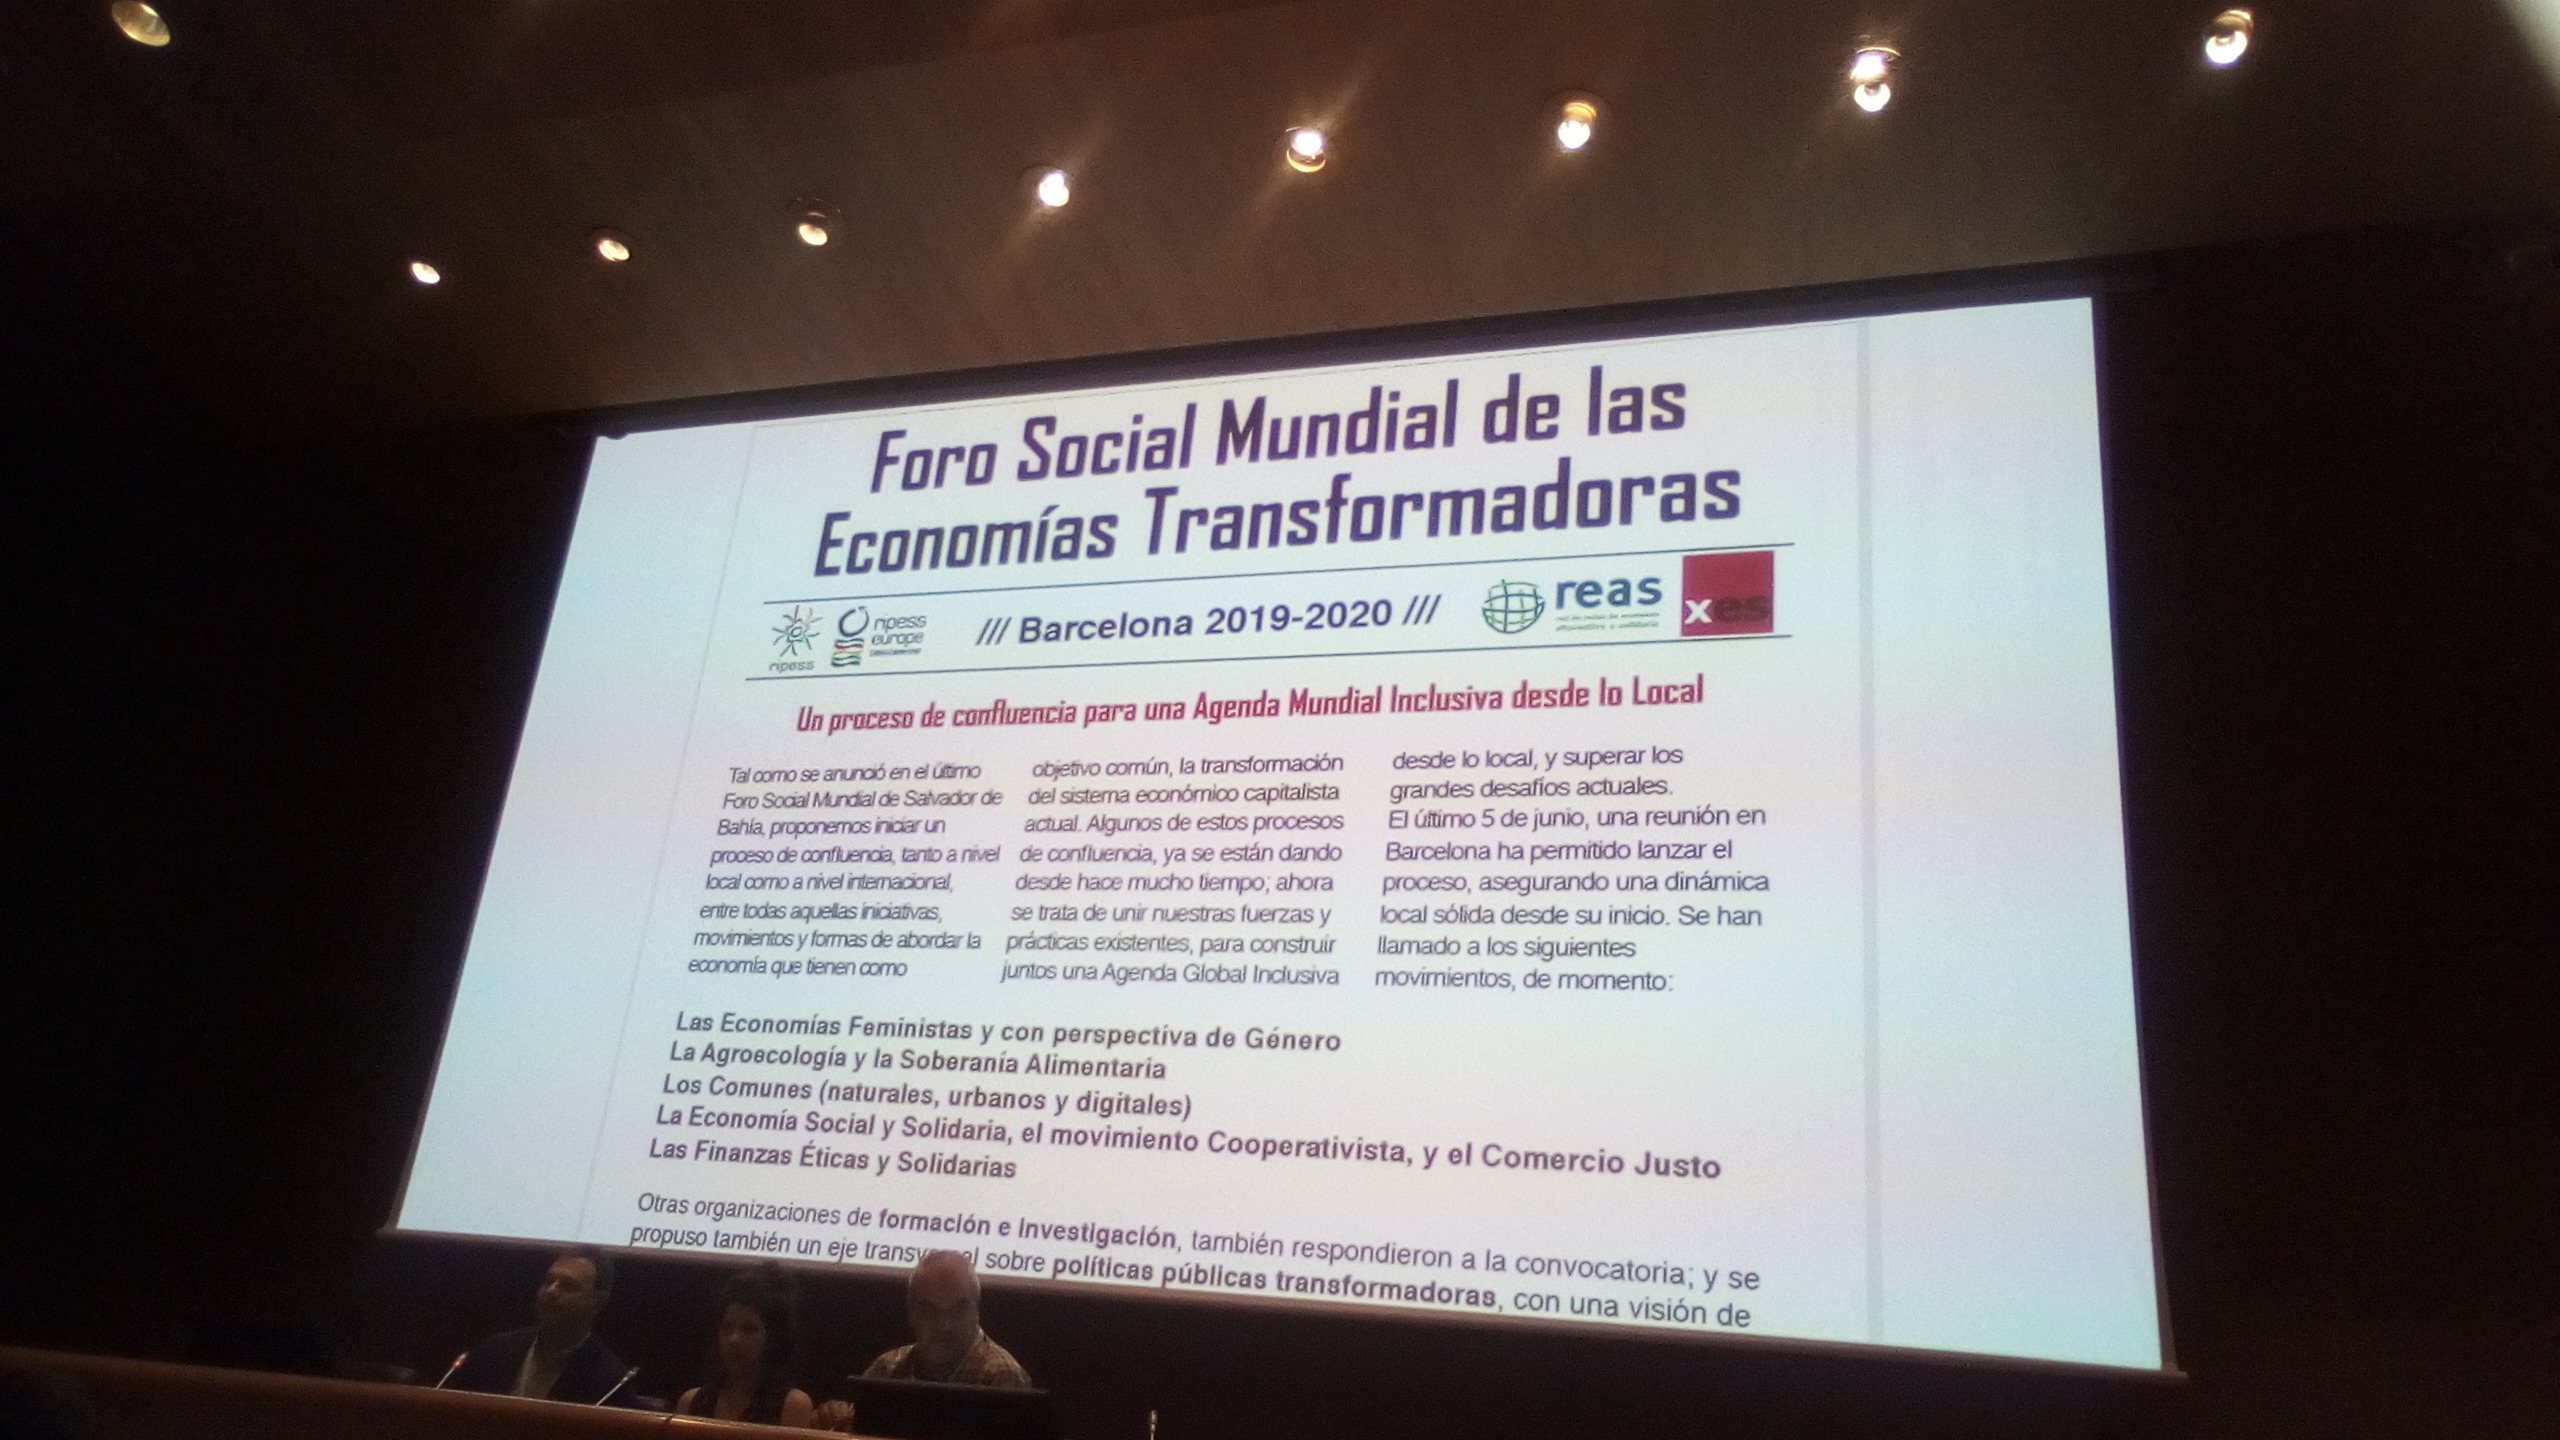 WSF of Transformative economies 2019-2020: update about the process